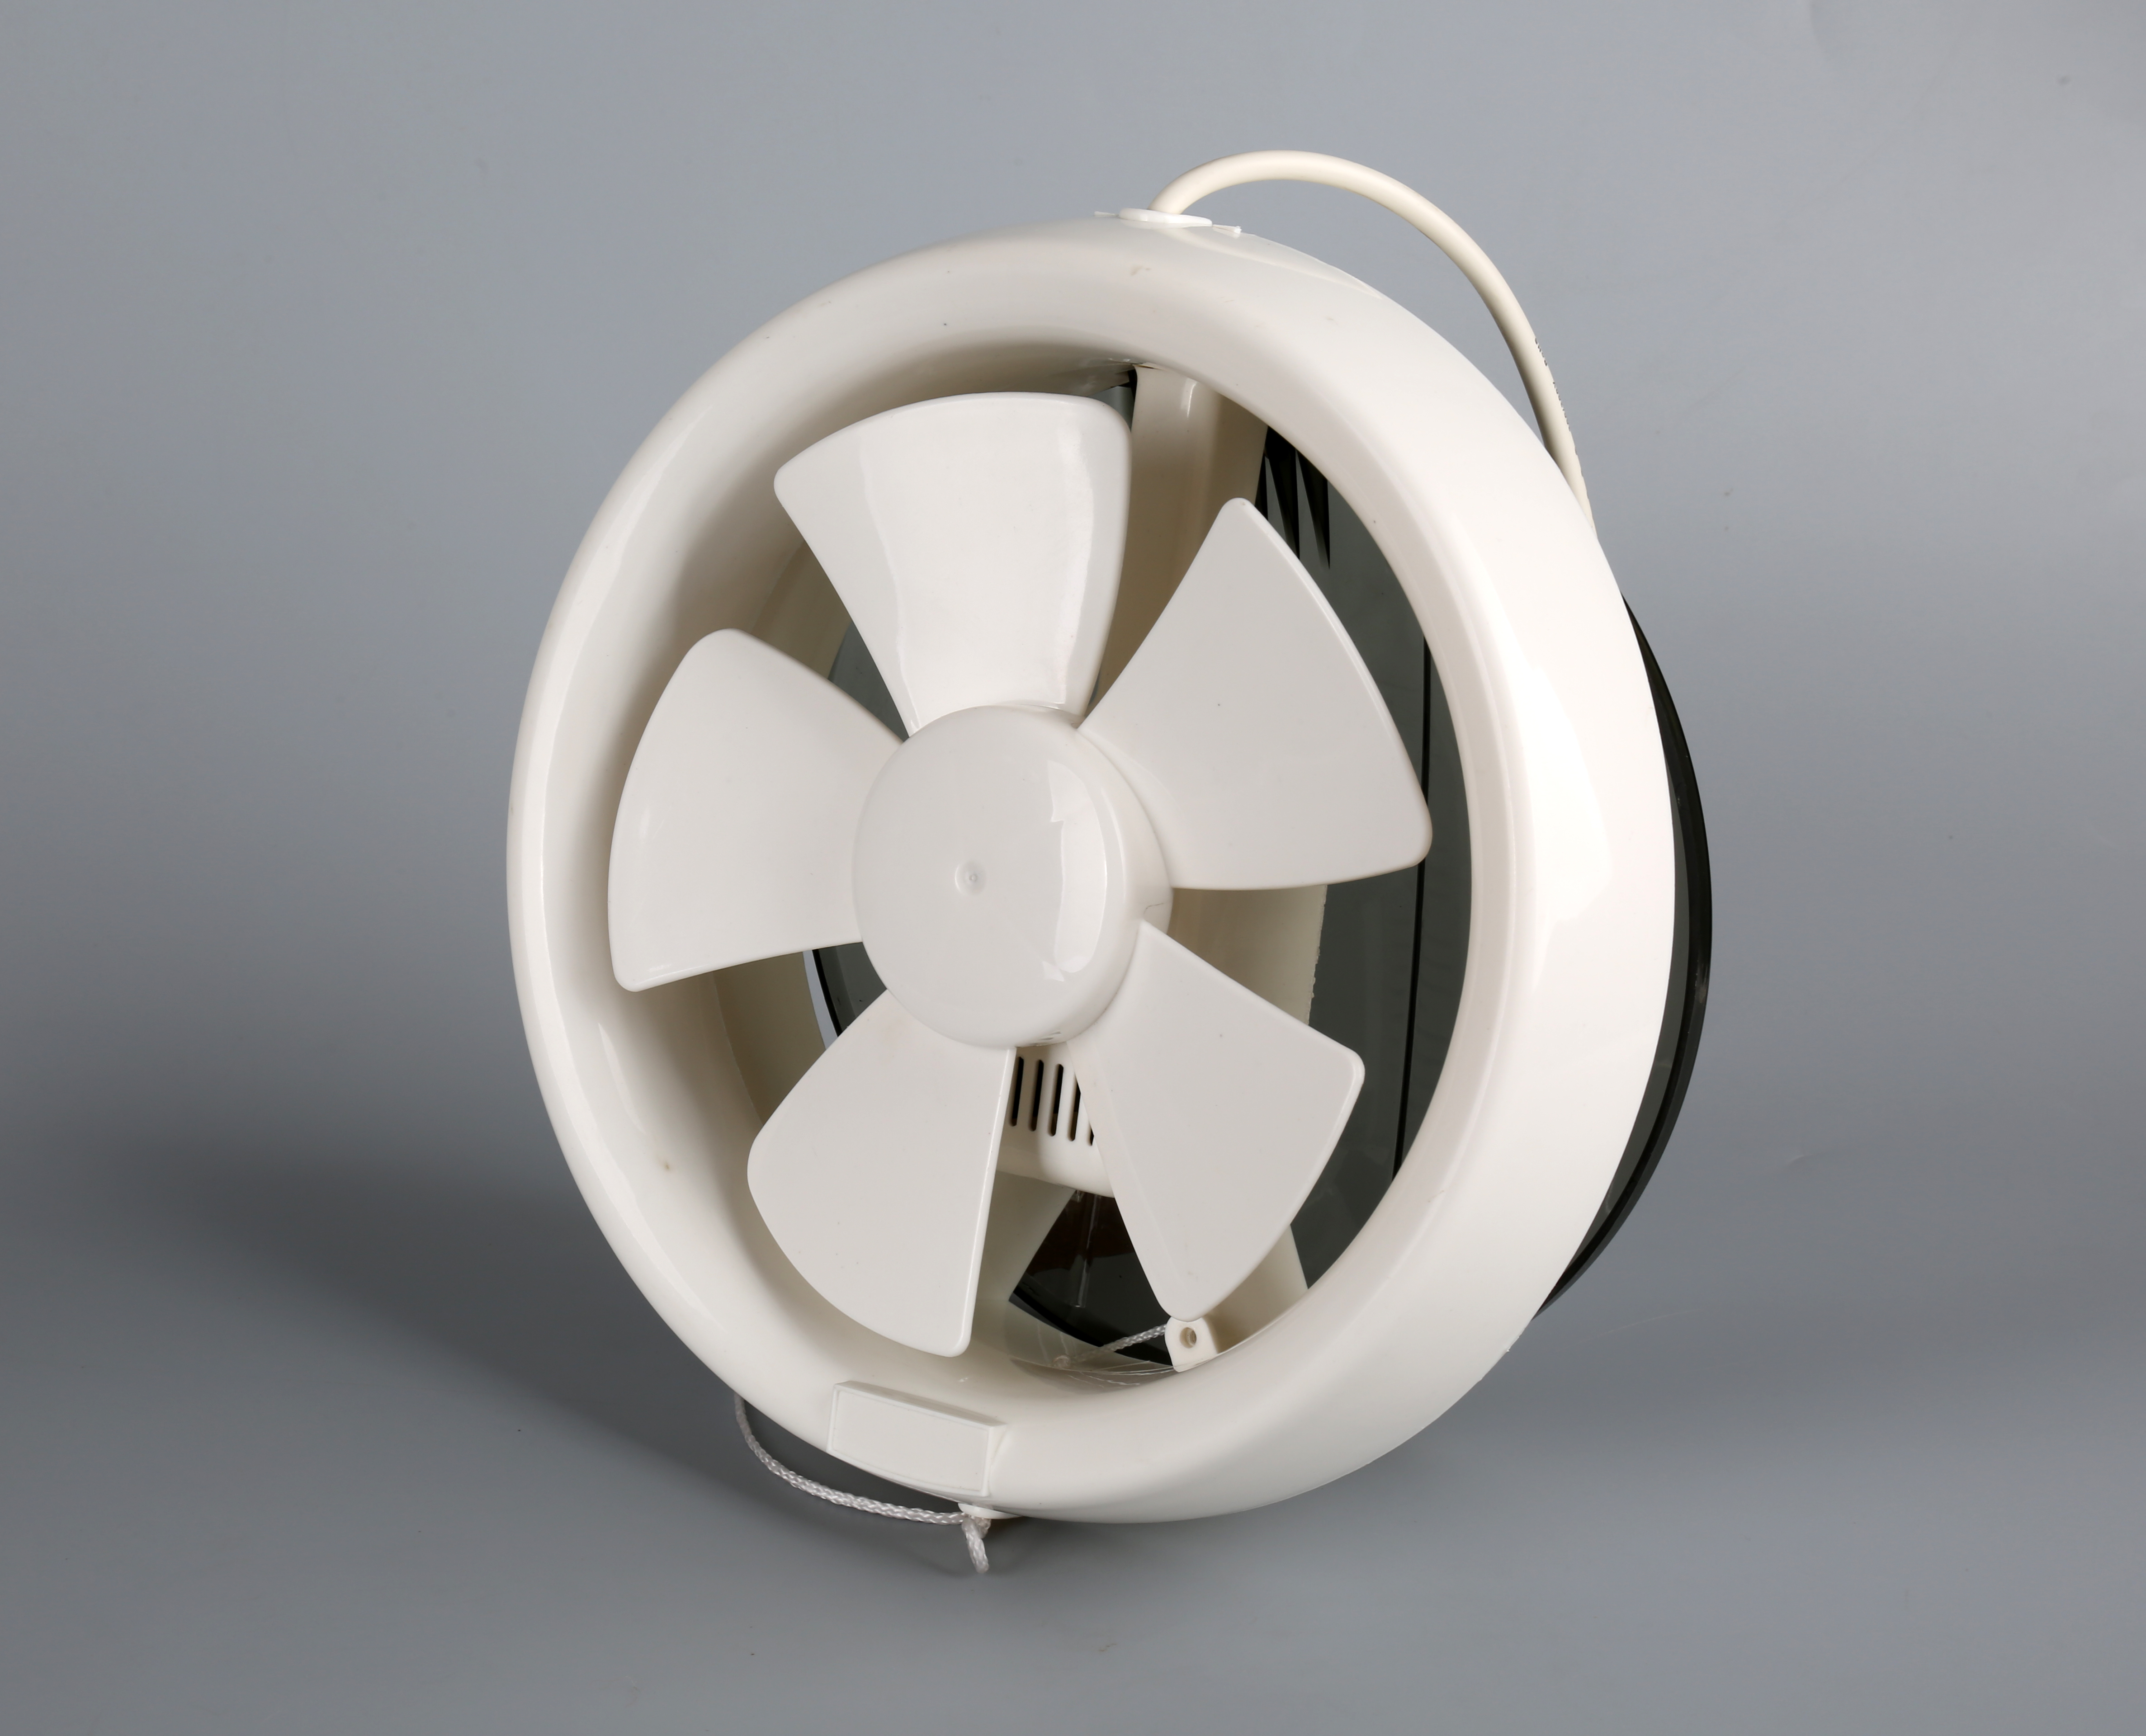 200mm Hydroponics Silent Ceiling Wall Mounted Exhaust Fan